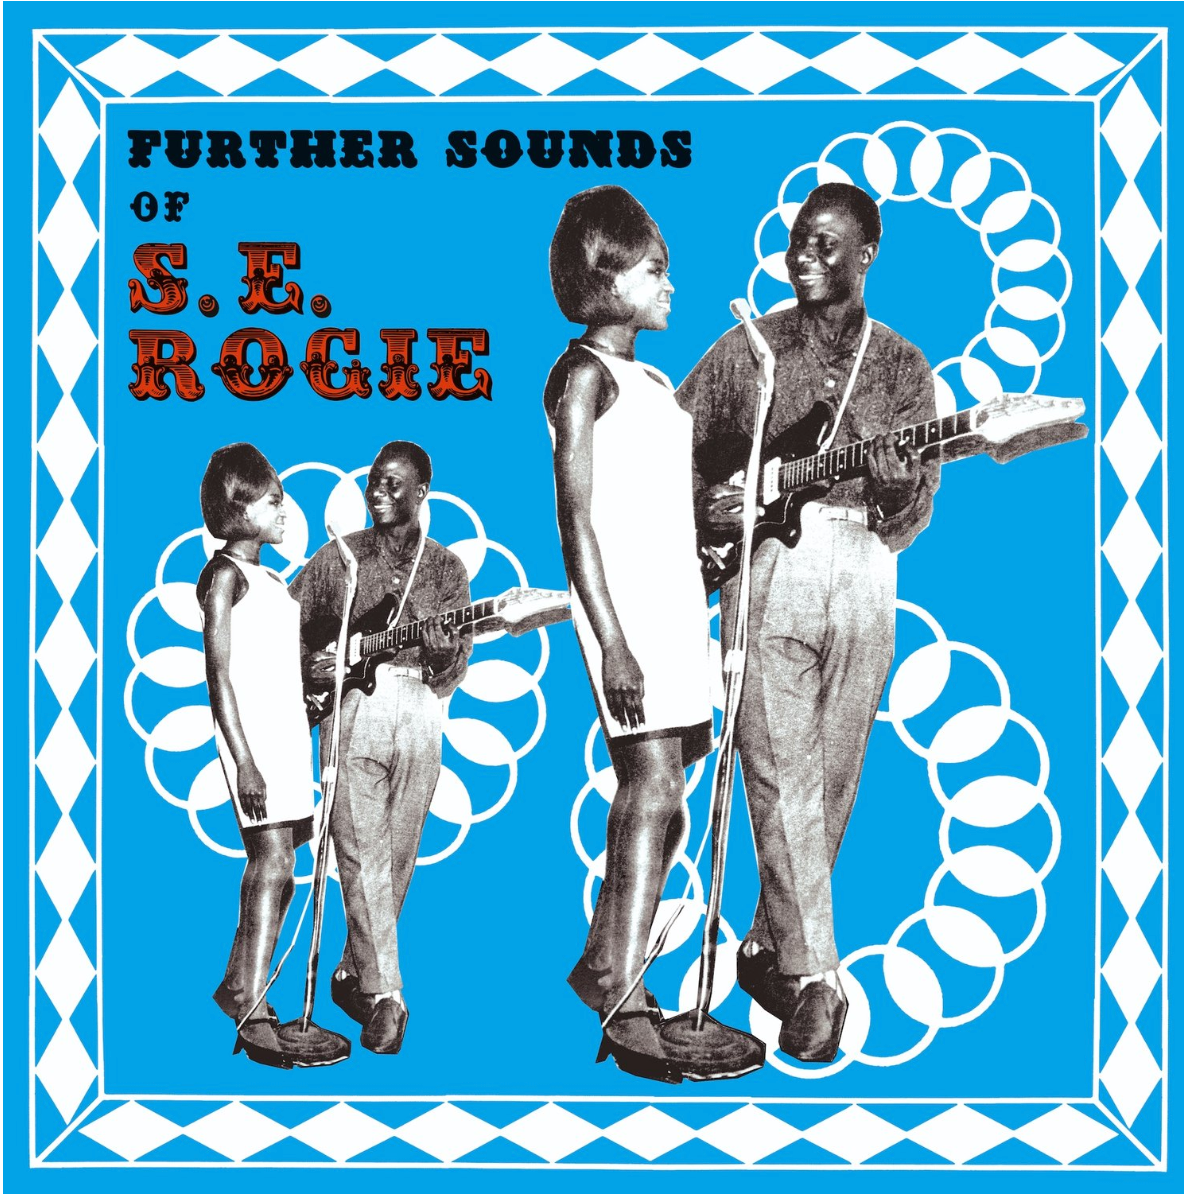 S.E. Rogie  "Further Sounds of S.E. Rogie"    1xLP [Mississippi Records]